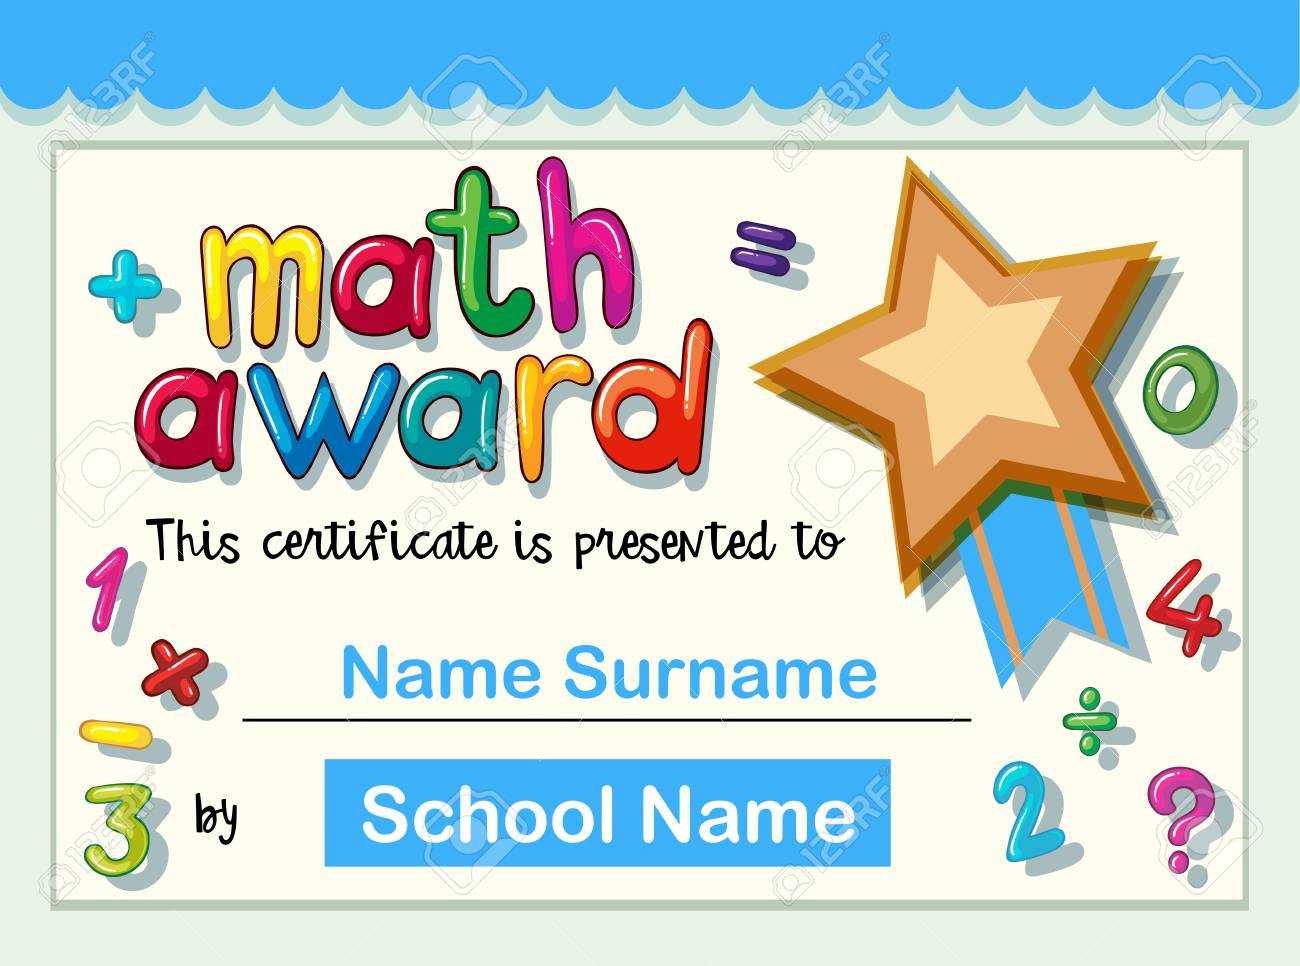 Certificate Template For Math Award With Golden Star Illustration In Star Award Certificate Template